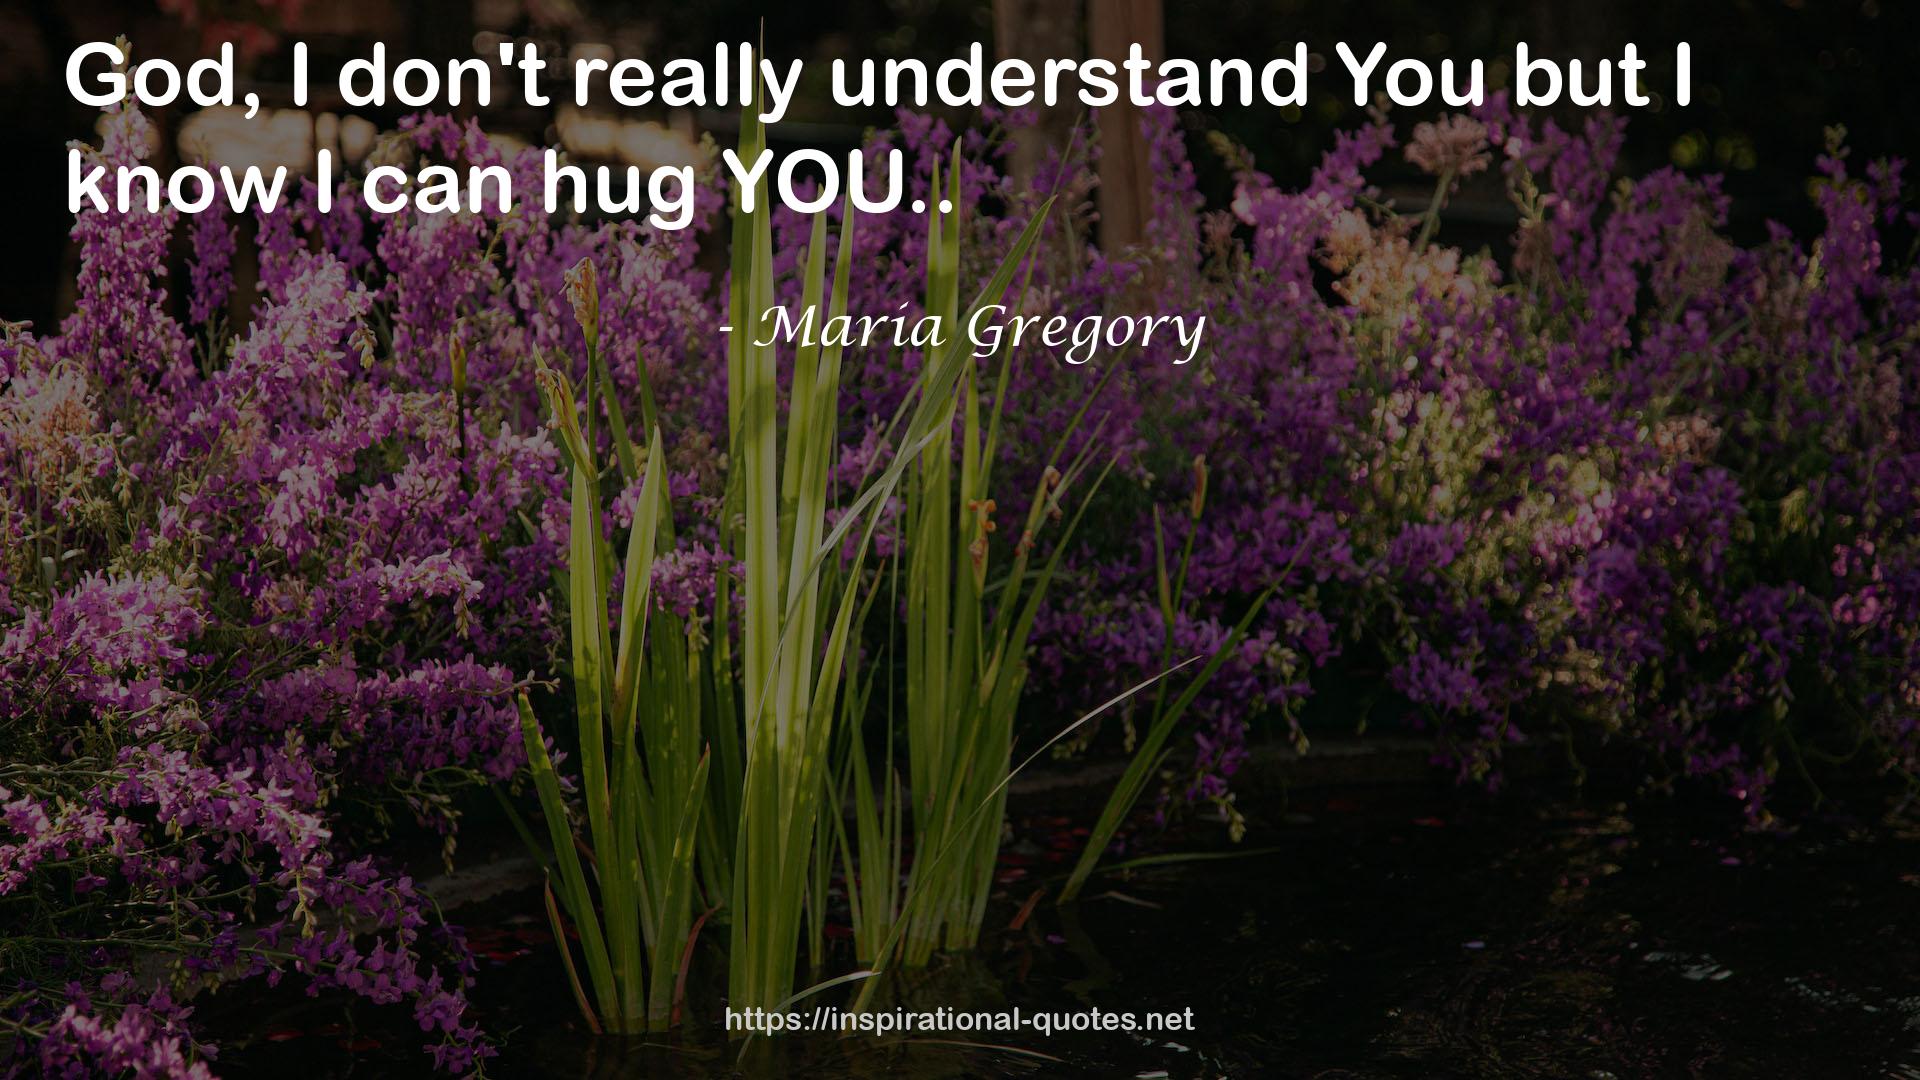 Maria Gregory QUOTES